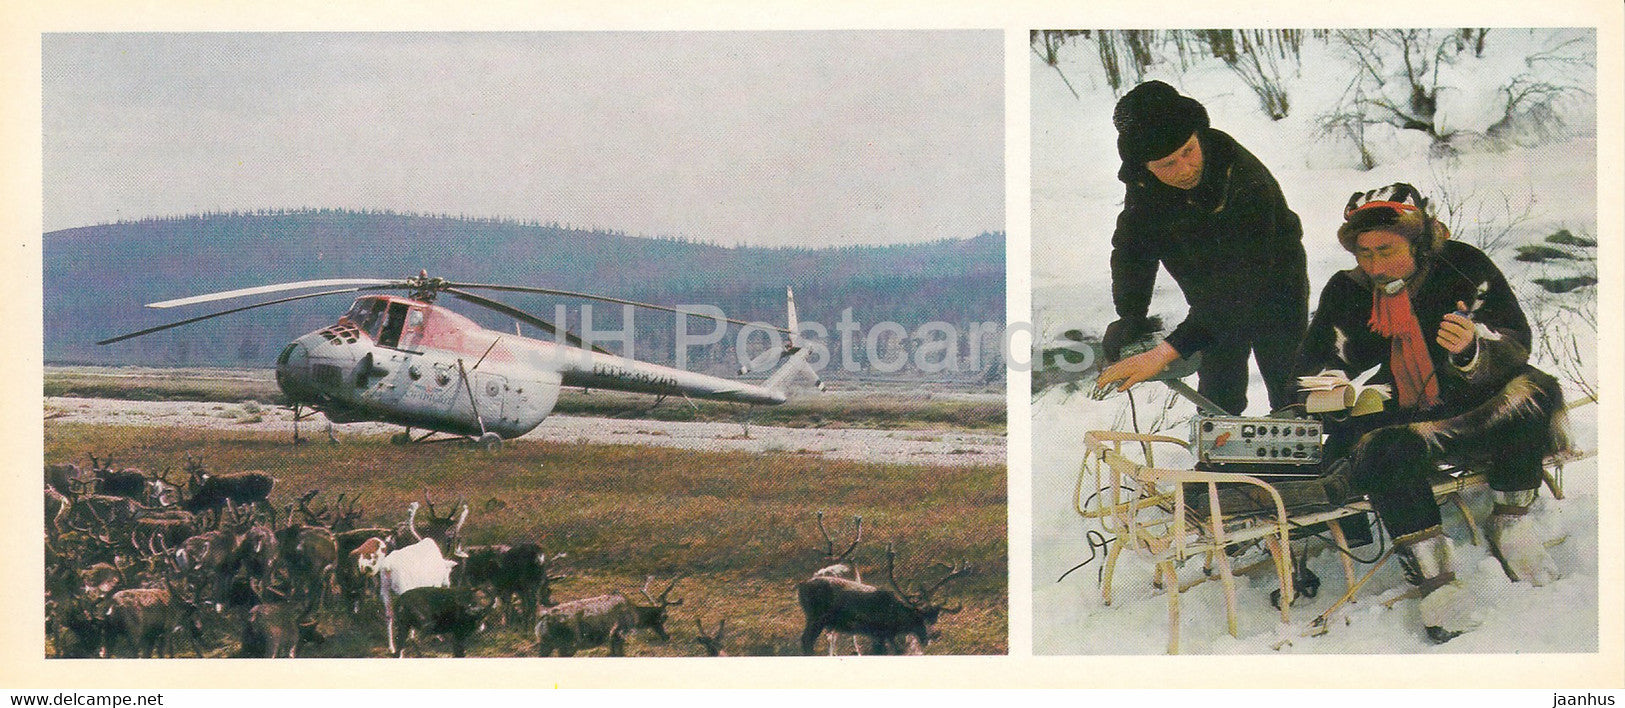 Kamchatka - modern technology at the service of reindeer herders - helicopter - 1981 - Russia USSR - unused - JH Postcards